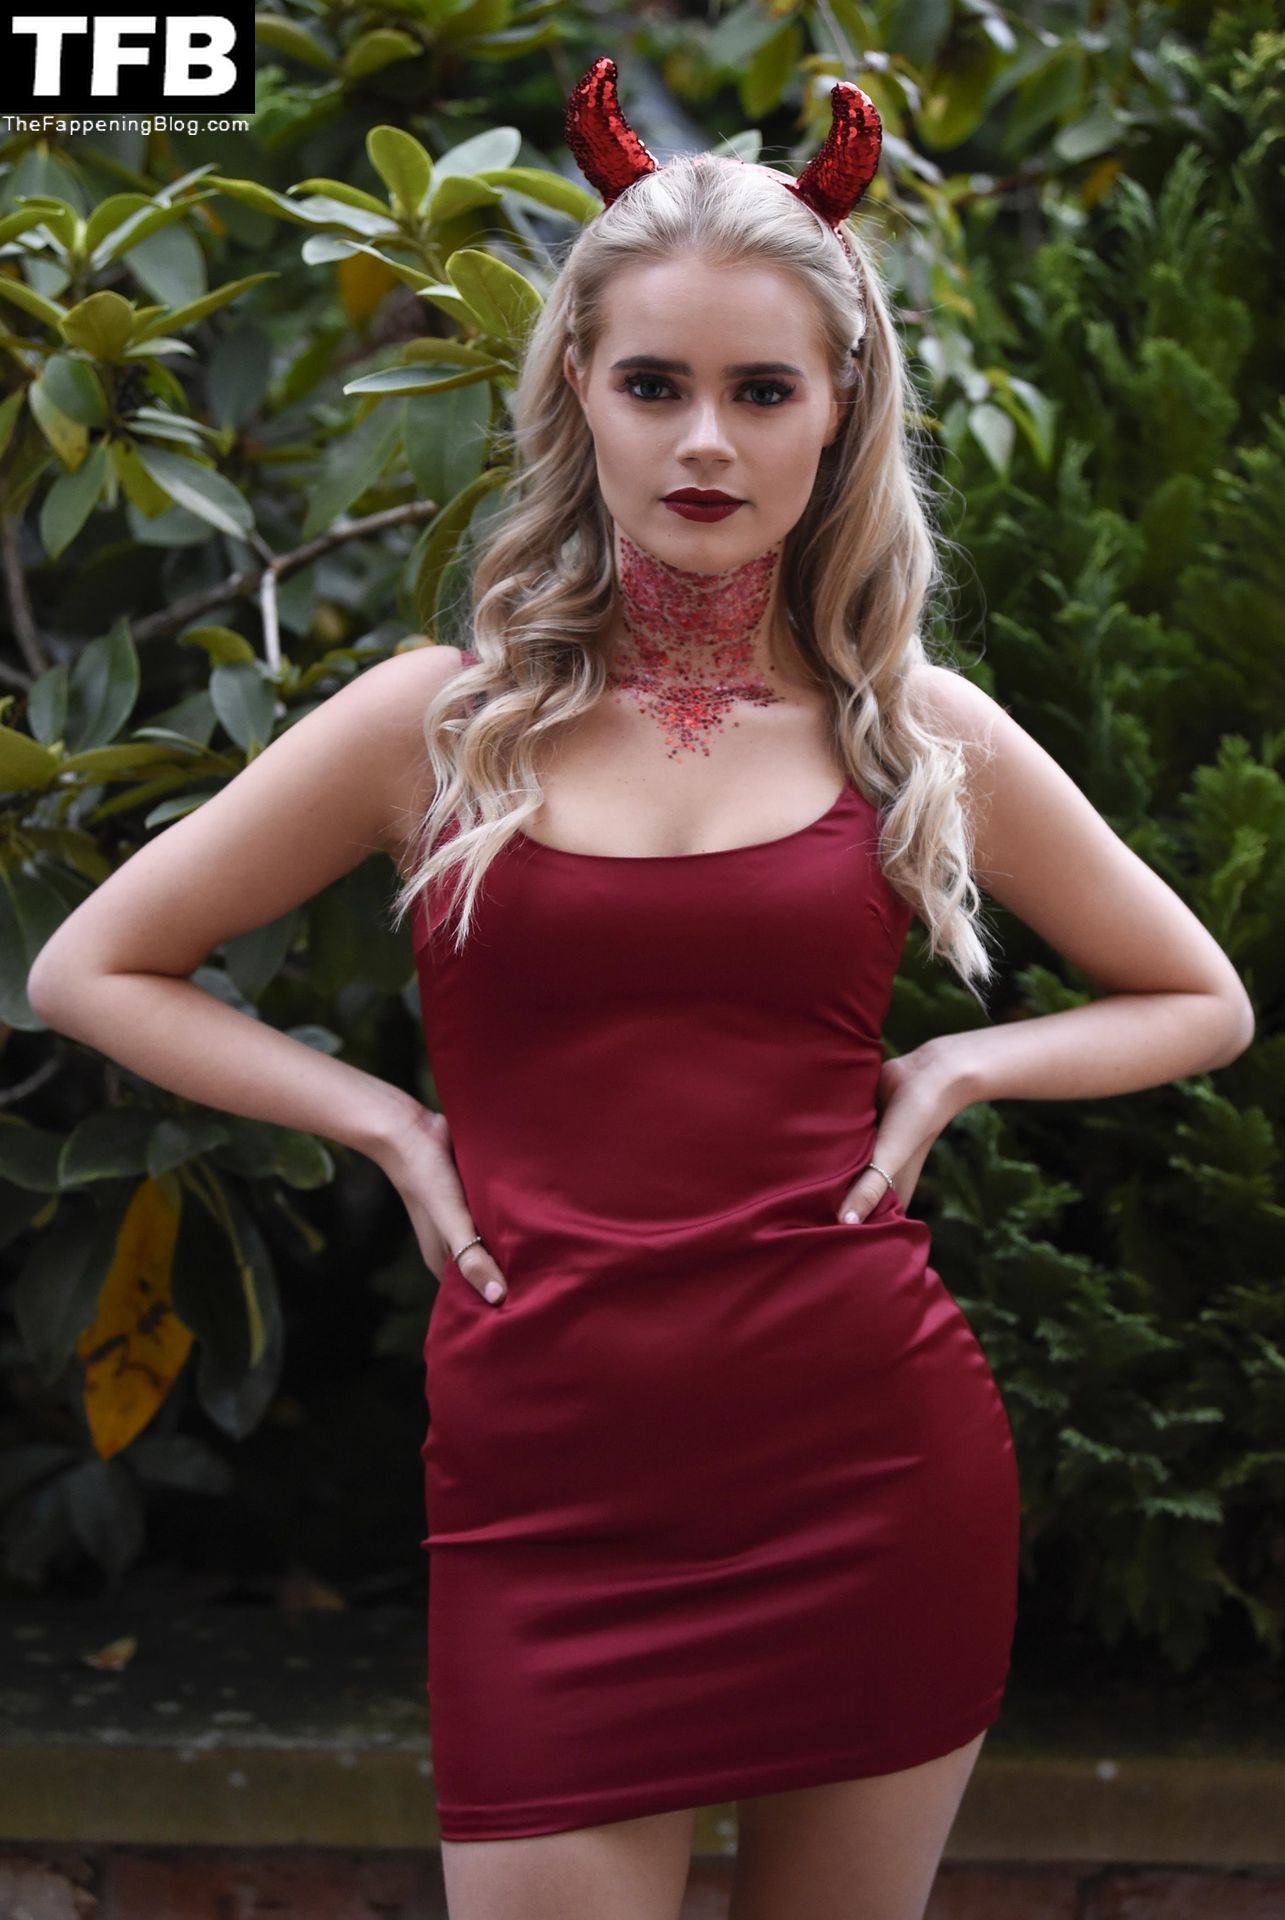 Lilly-Sue McFadden Shows Off Her Amazing Figure in a Red Dress (20 Photos)